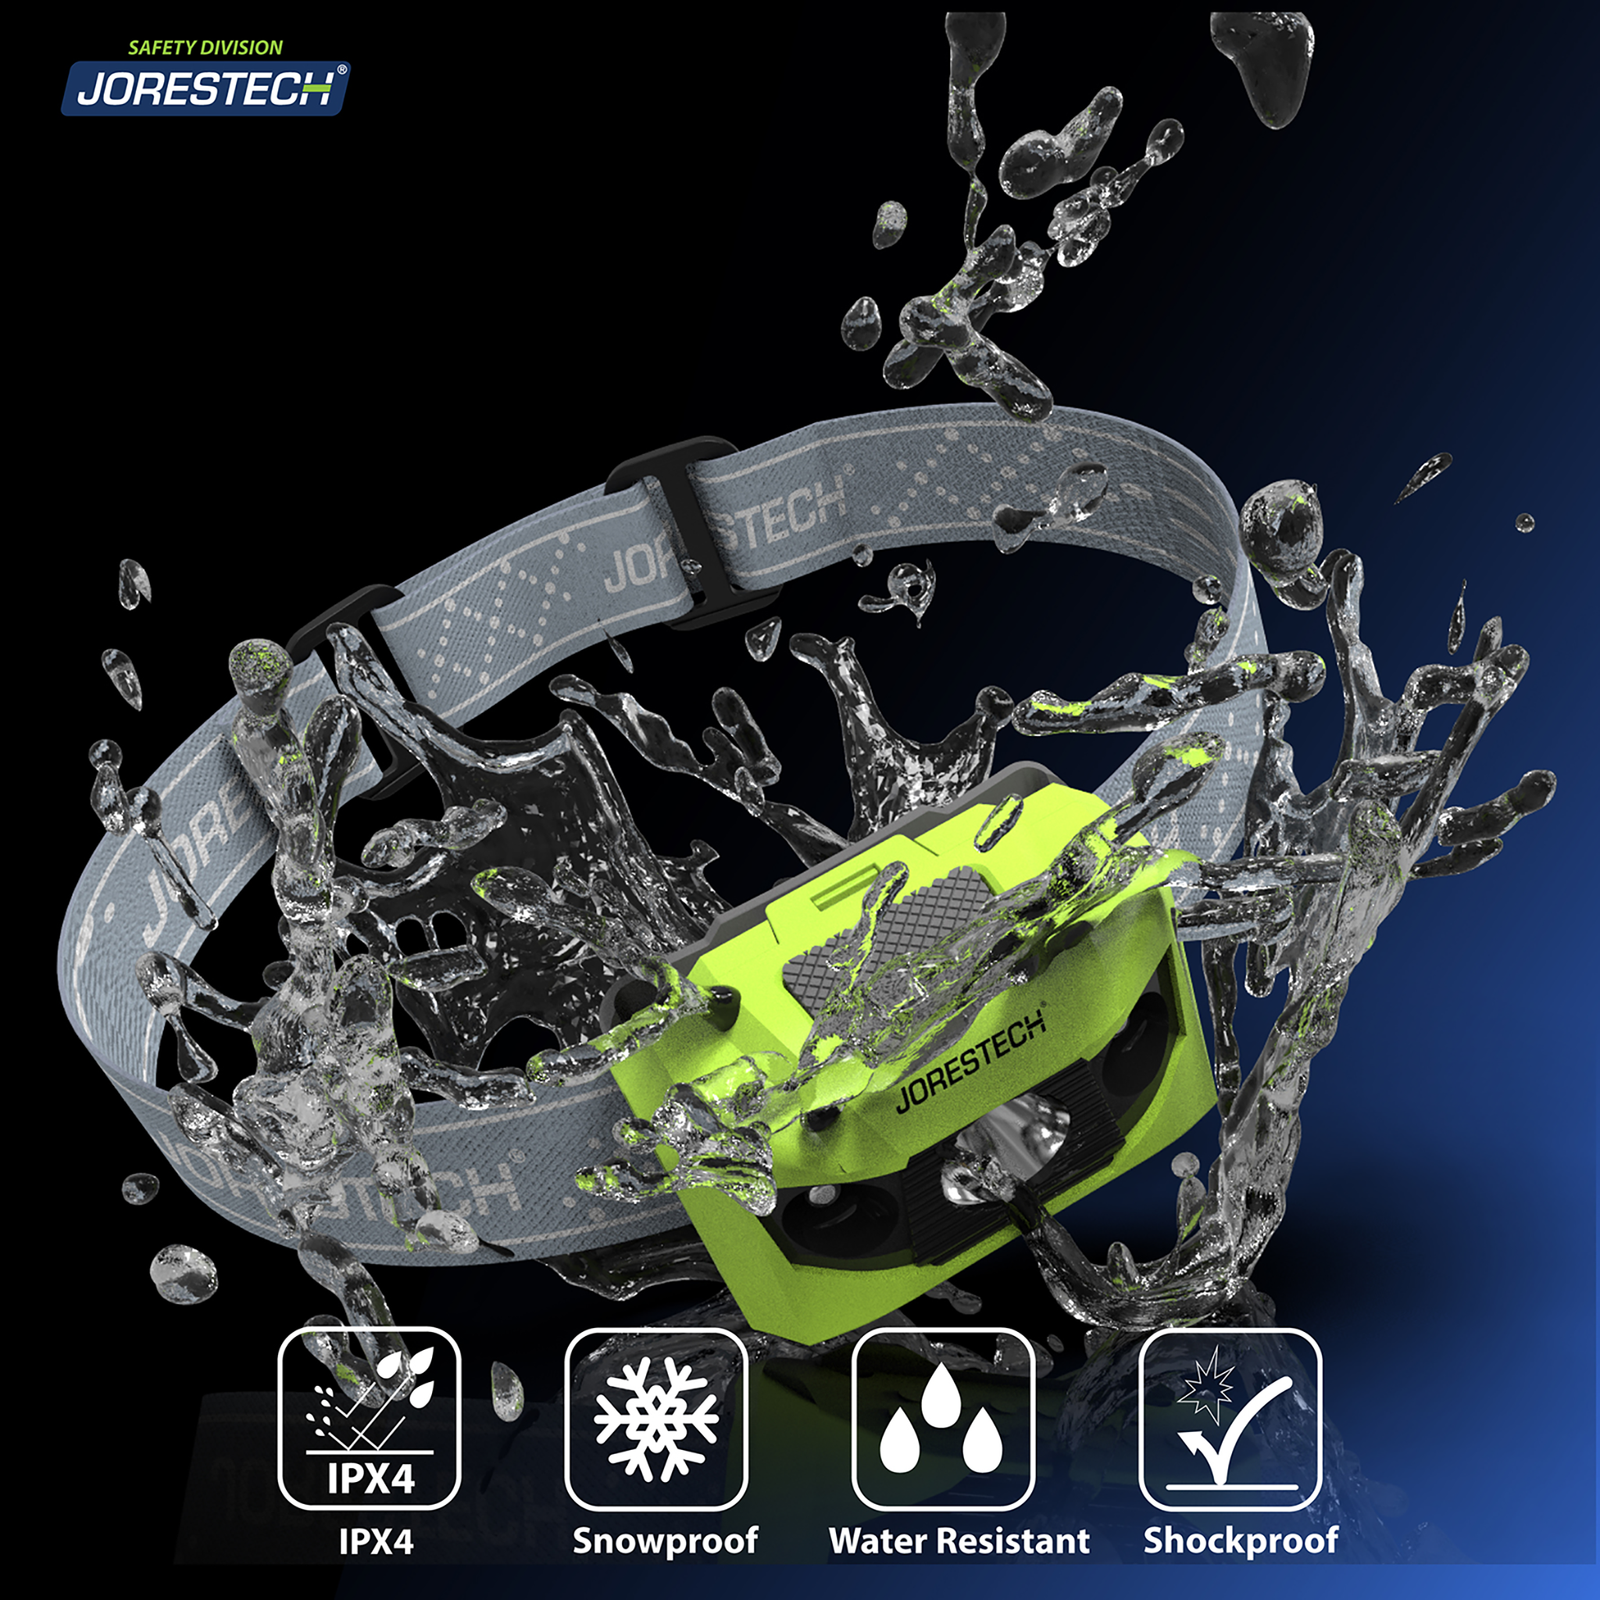 Lime head lamp being splashed by water to show that the are water resistant, snow resistant and shockproof